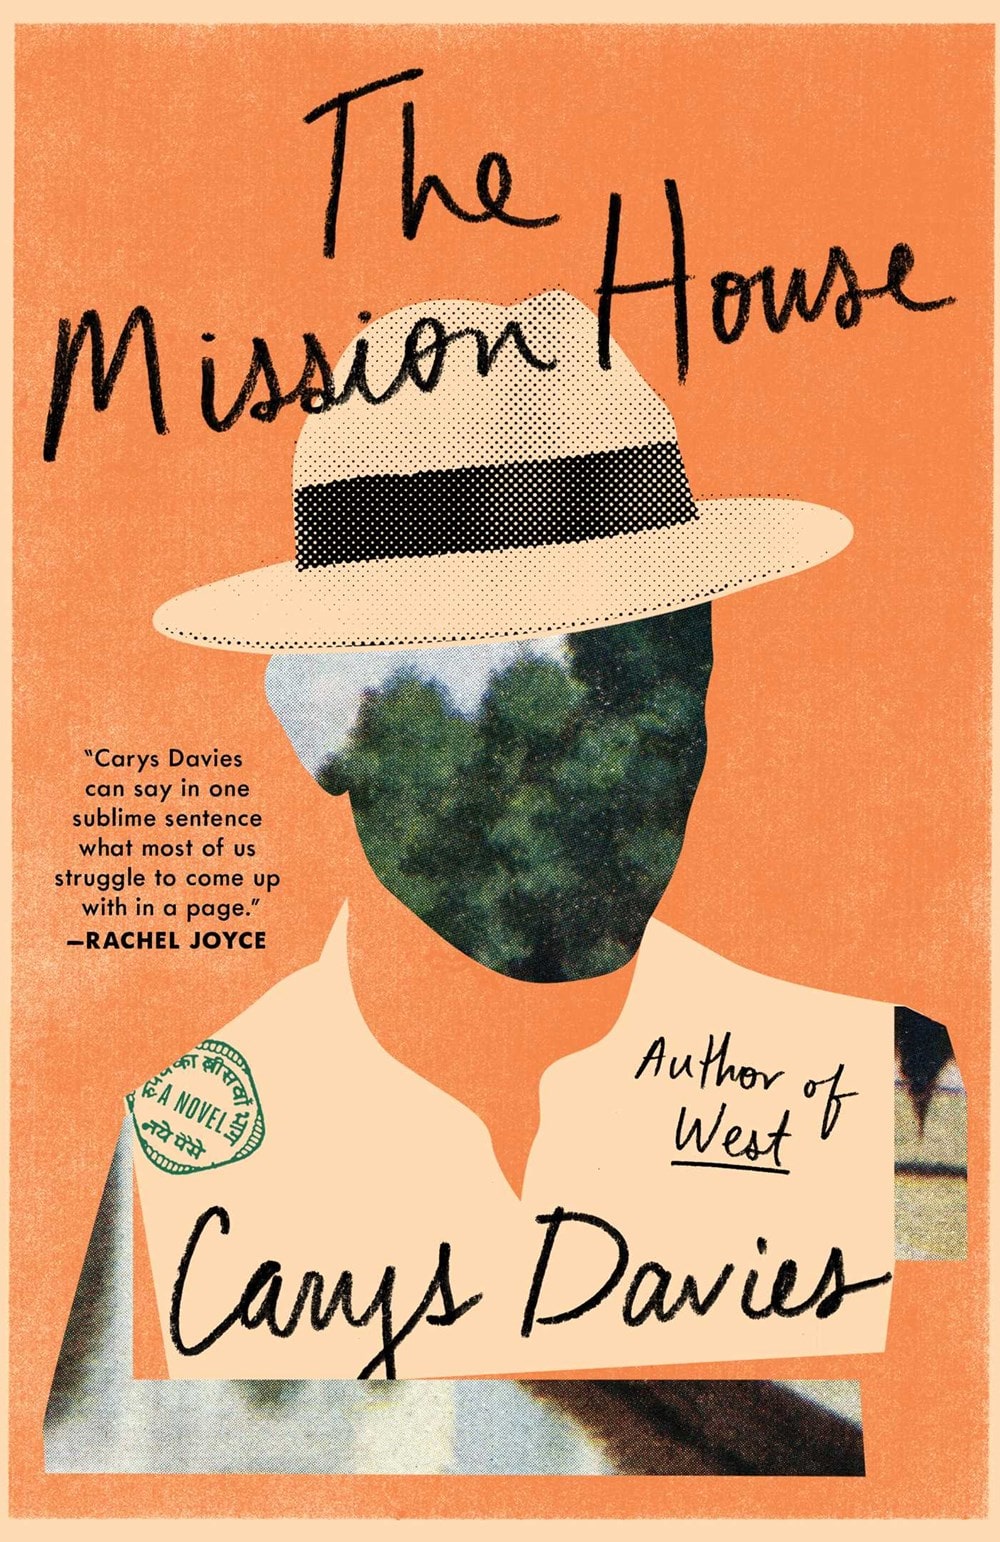 The-Mission-House-book-cover